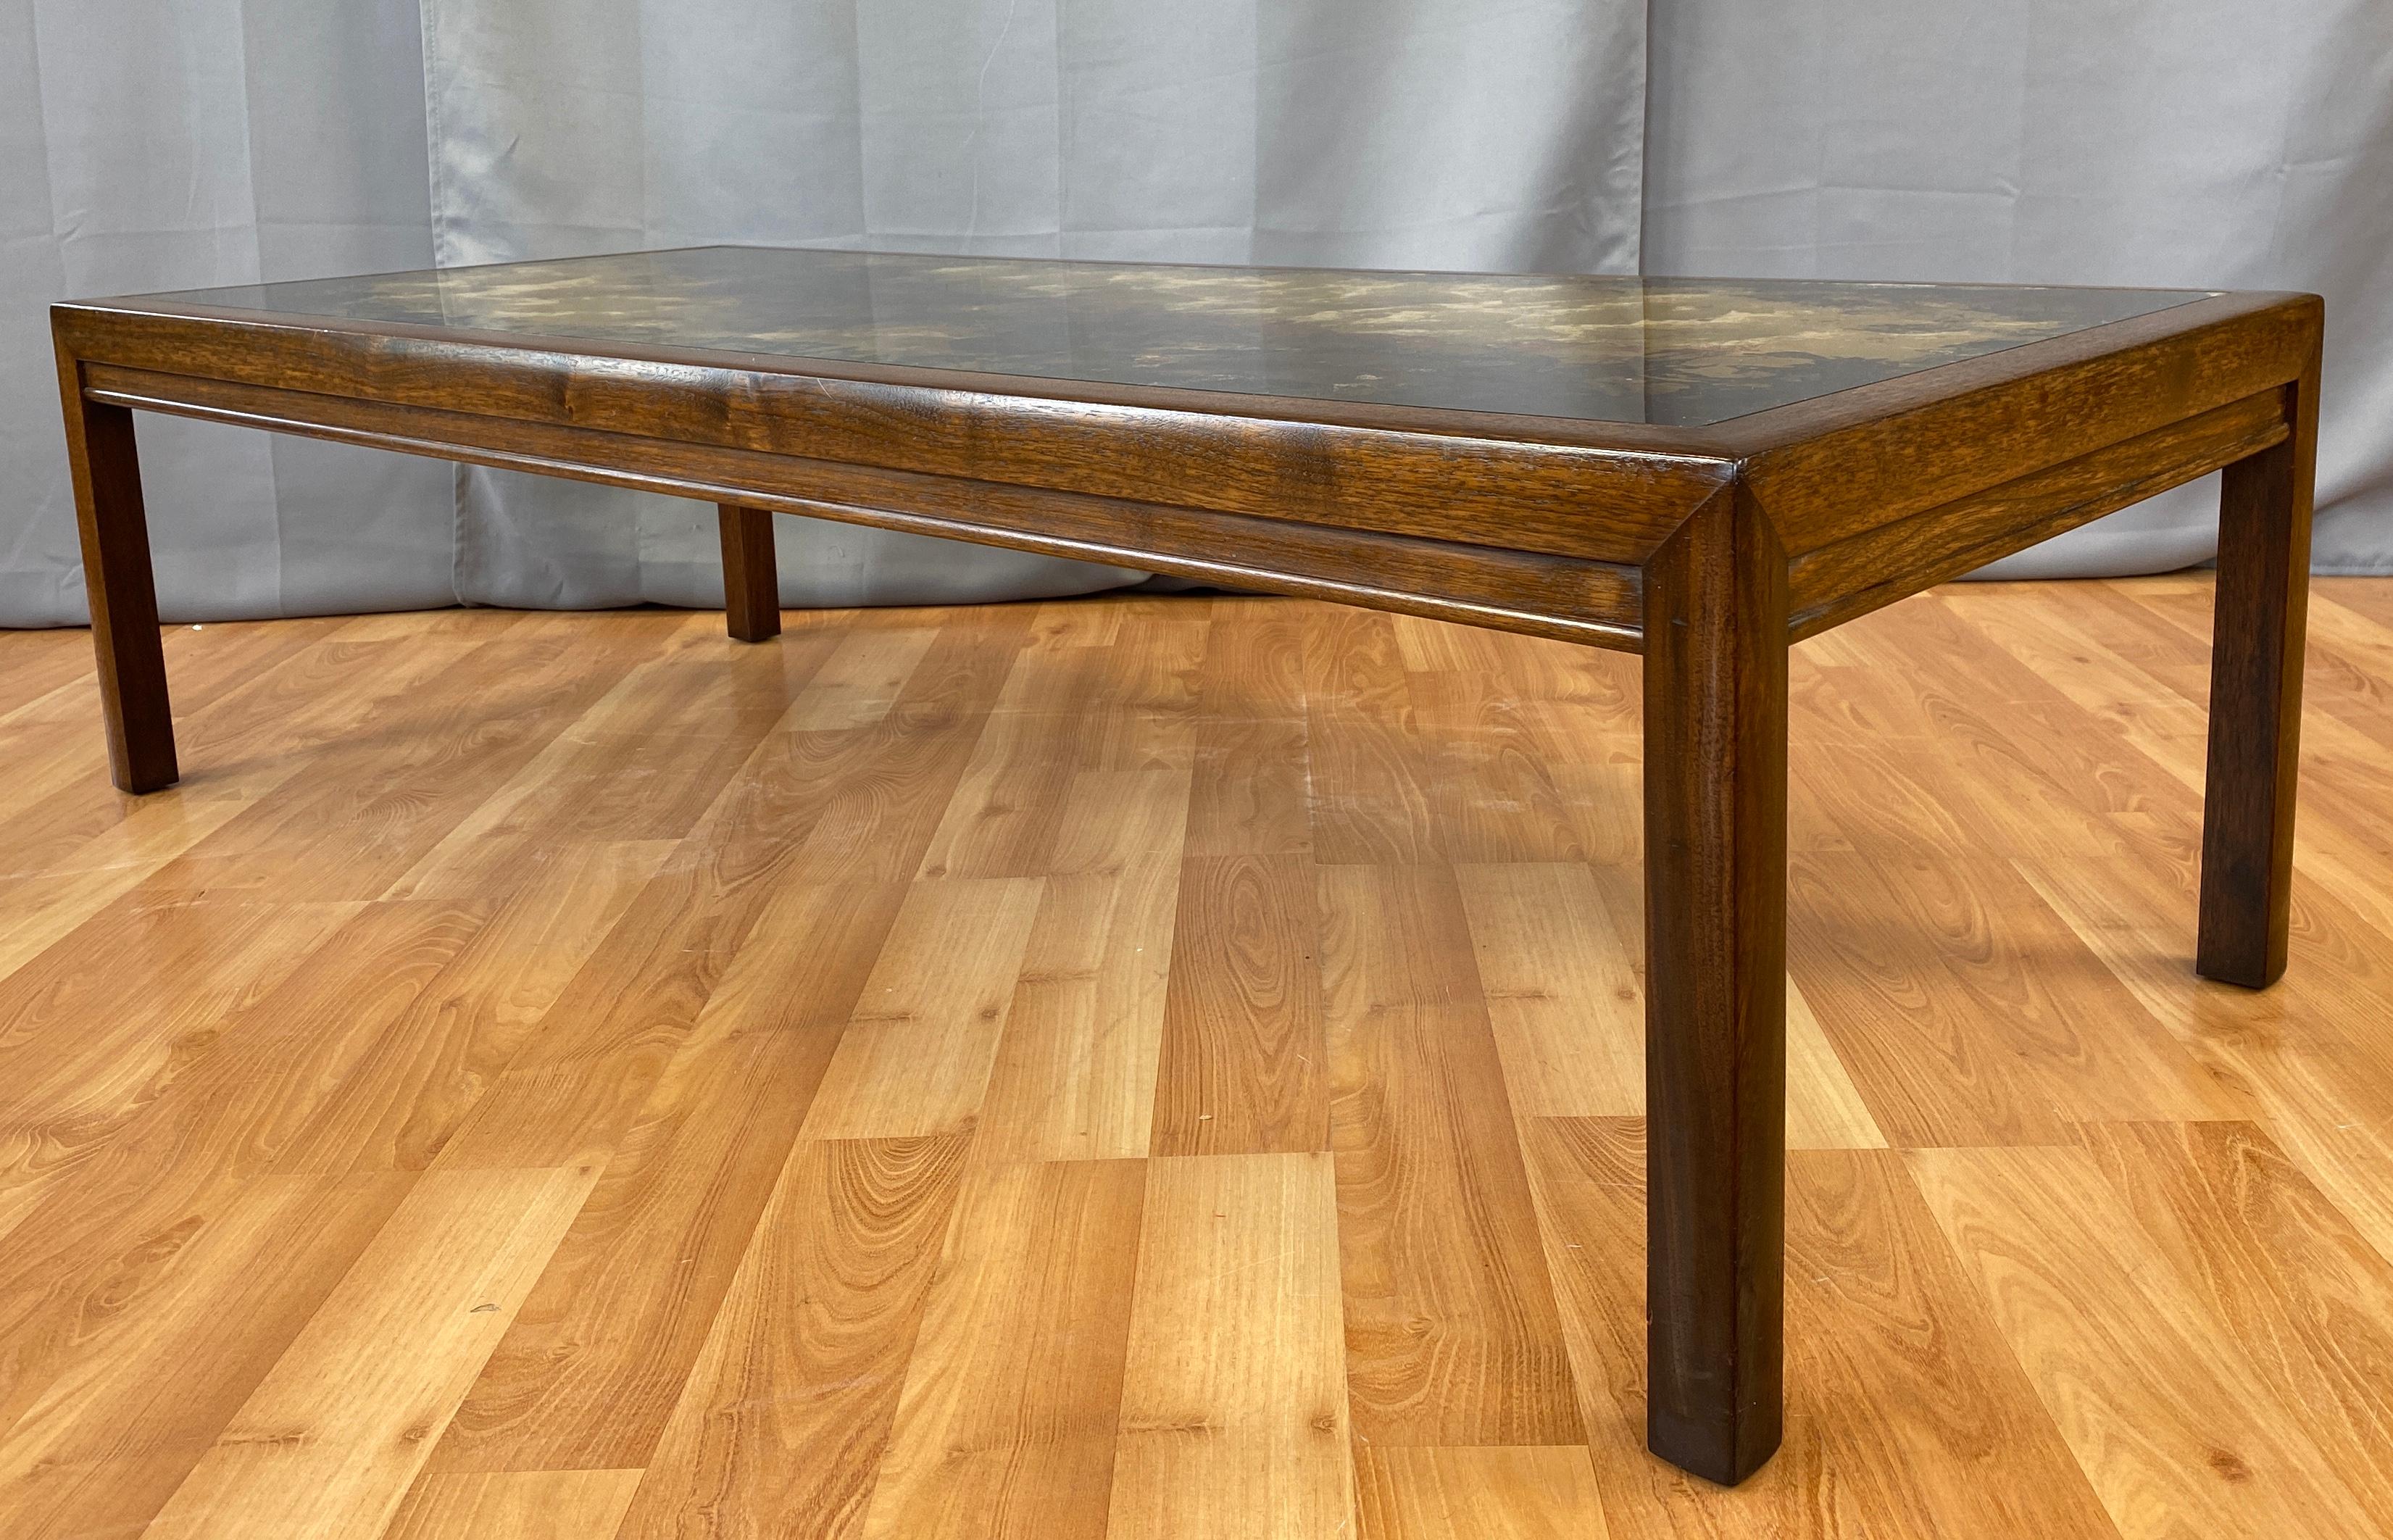 A strikingly elegant coffee table is a masterful work of art, as illustrated by this 1970s bespoke piece with elements that remind us of certain designs by John Keal for Brown-Saltman.

Gold leaf and paint applied with skillful technique and an